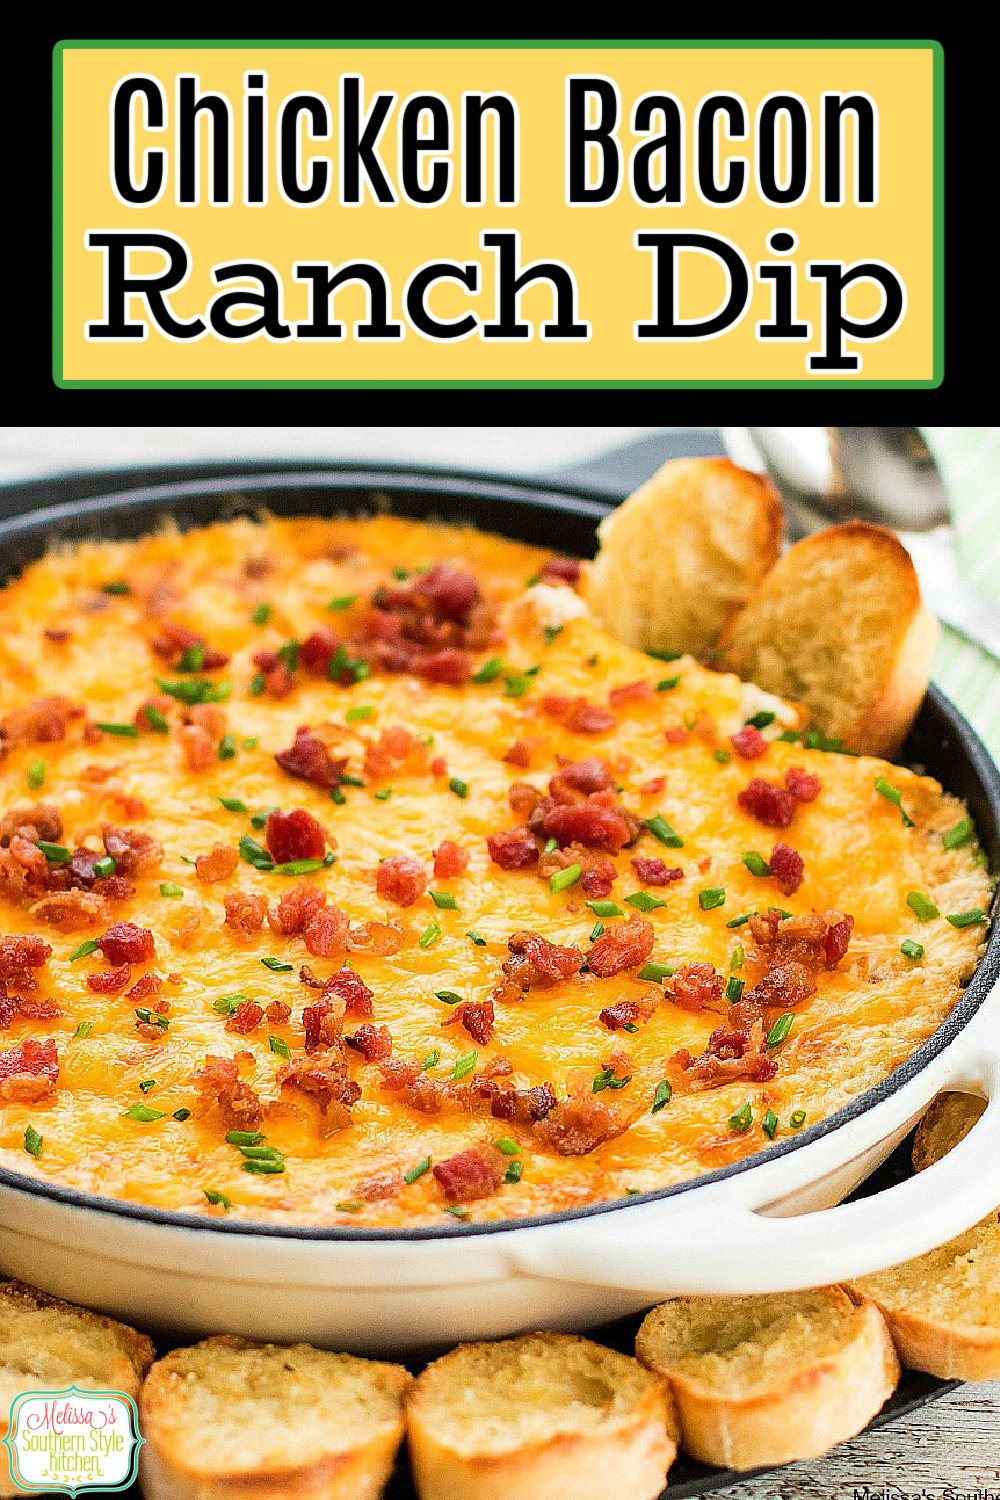 This gooey Chicken Bacon Ranch Dip is impossible to resist. It's practically a meal on it's own perfect for those days you want to dip your dinner #chickenbaconranch #chickenbacondip #bacondip #diprecipes #ranchdressing #easychickenrecipes #appetizers #bacon #southernfood #southernrecipes #tailgating #footballfood #gamedayrecipes #holidayrecipes via @melissasssk